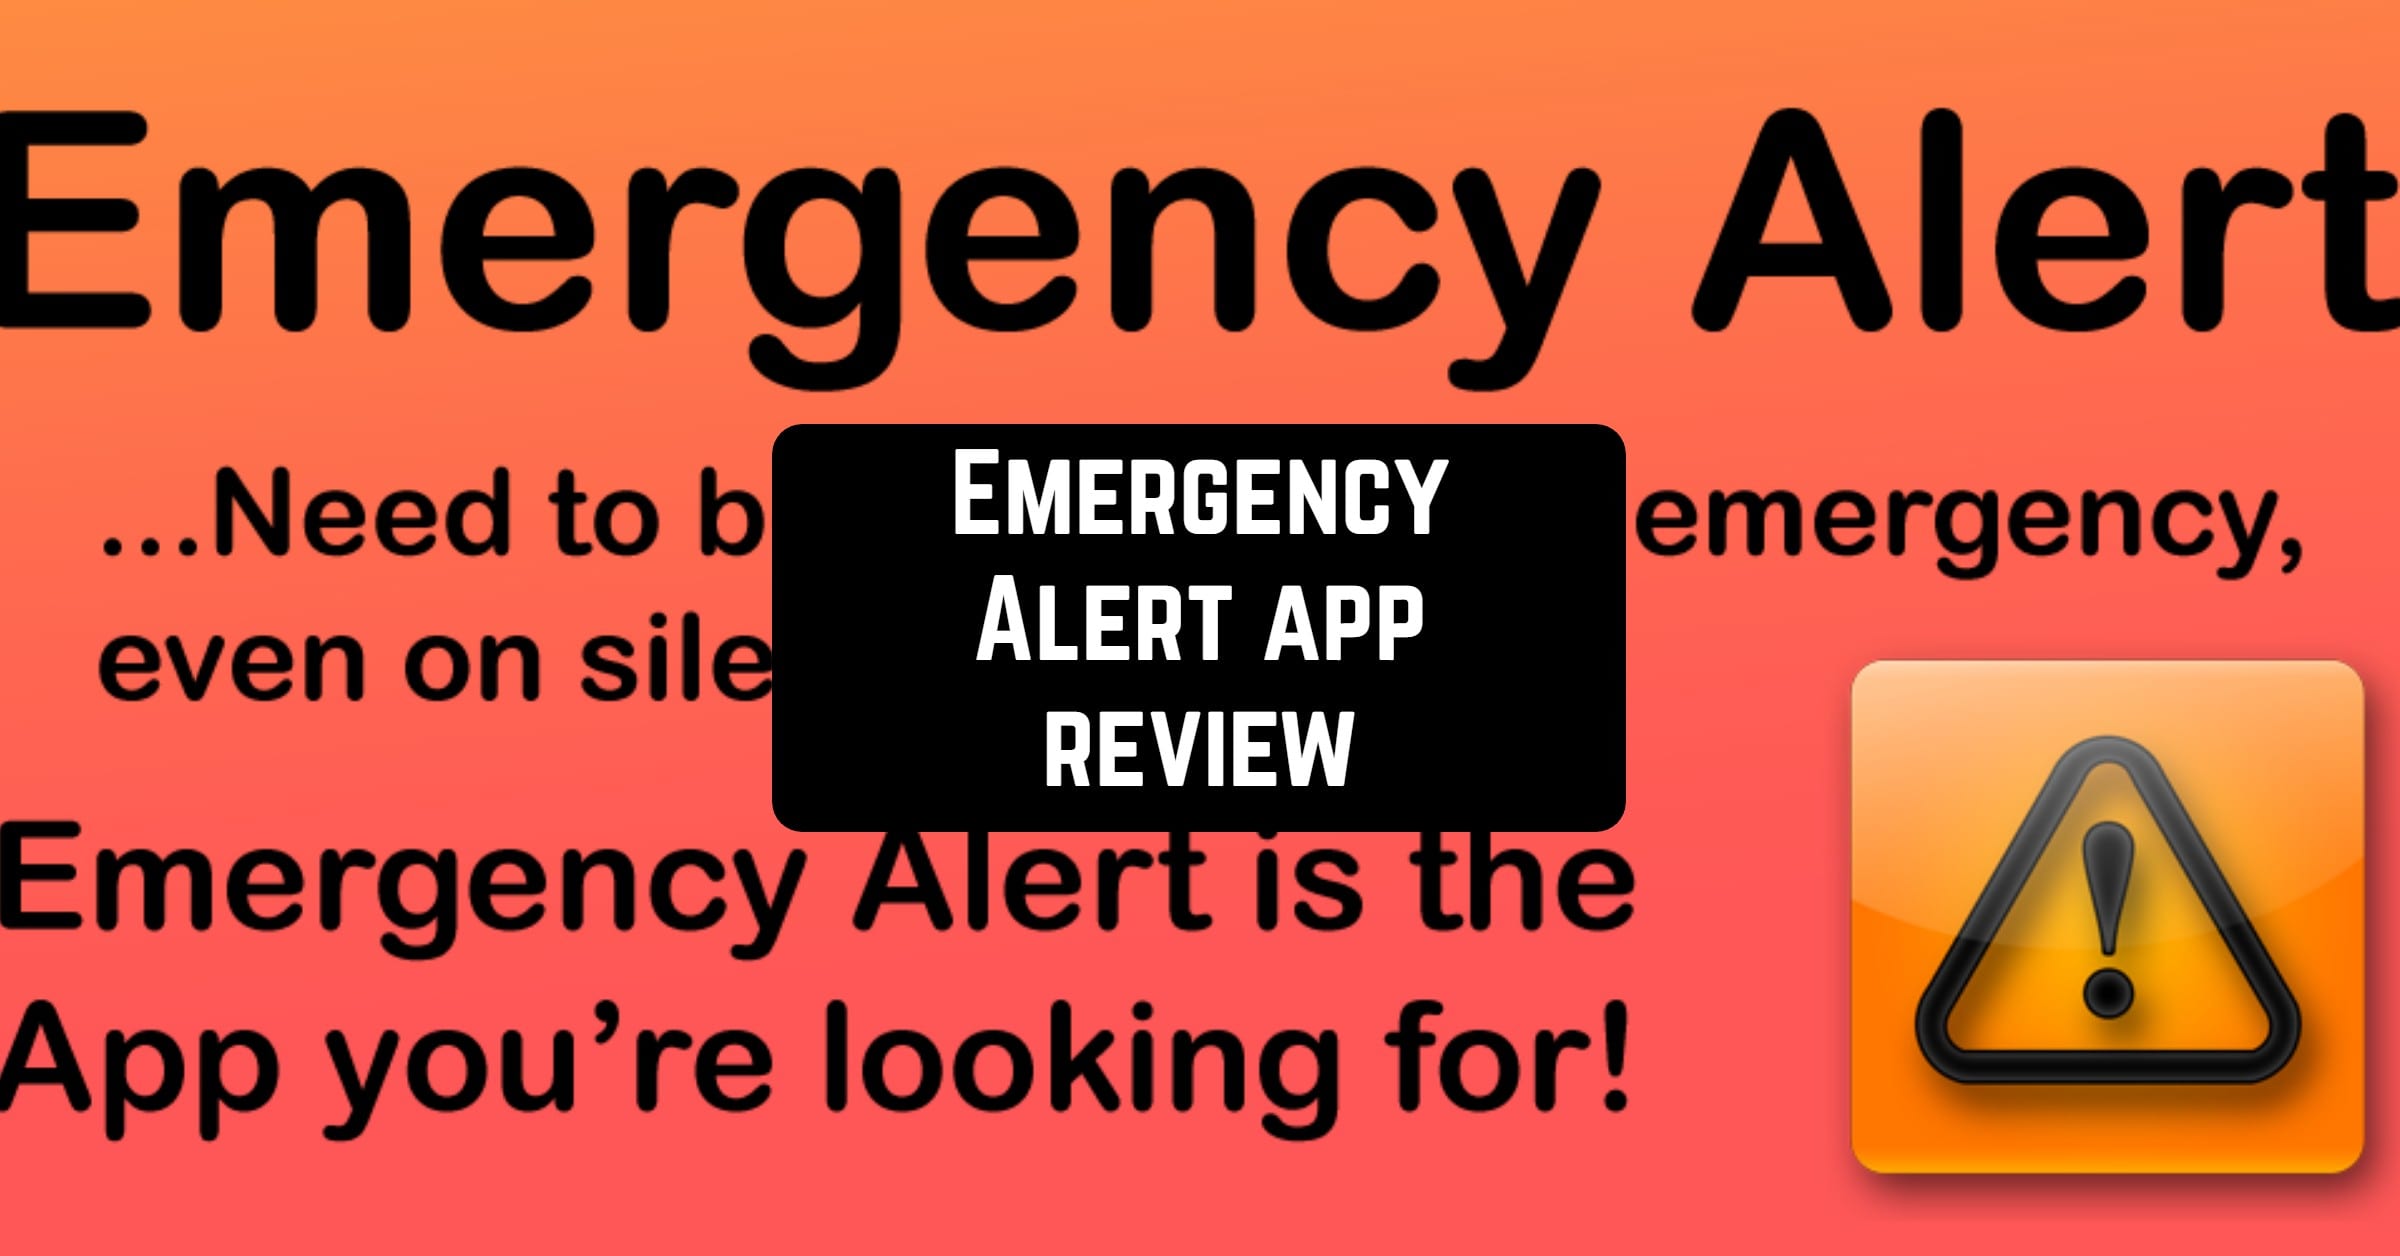 Emergency Alert App Review | Free apps for Android and iOS